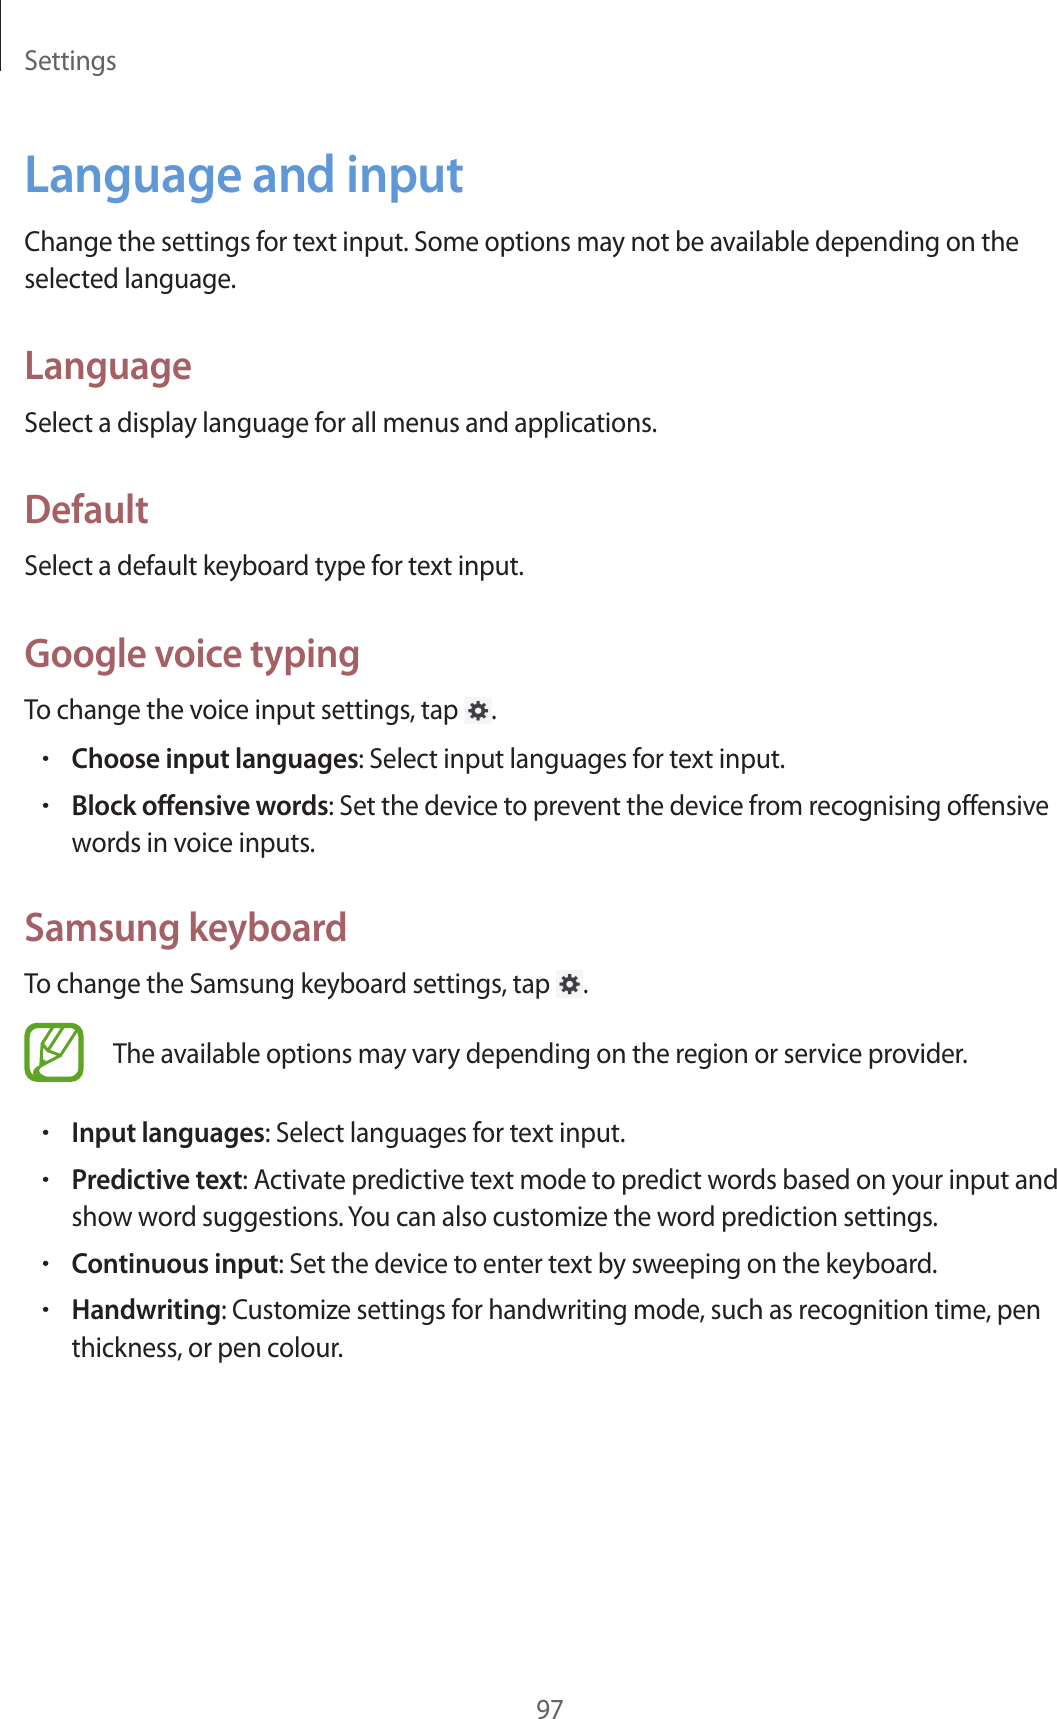 Settings97Language and inputChange the settings for text input. Some options may not be available depending on the selected language.LanguageSelect a display language for all menus and applications.DefaultSelect a default keyboard type for text input.Google voice typingTo change the voice input settings, tap  .• Choose input languages: Select input languages for text input.• Block offensive words: Set the device to prevent the device from recognising offensive words in voice inputs.Samsung keyboardTo change the Samsung keyboard settings, tap  .The available options may vary depending on the region or service provider.• Input languages: Select languages for text input.• Predictive text: Activate predictive text mode to predict words based on your input and show word suggestions. You can also customize the word prediction settings.• Continuous input: Set the device to enter text by sweeping on the keyboard.• Handwriting: Customize settings for handwriting mode, such as recognition time, pen thickness, or pen colour.